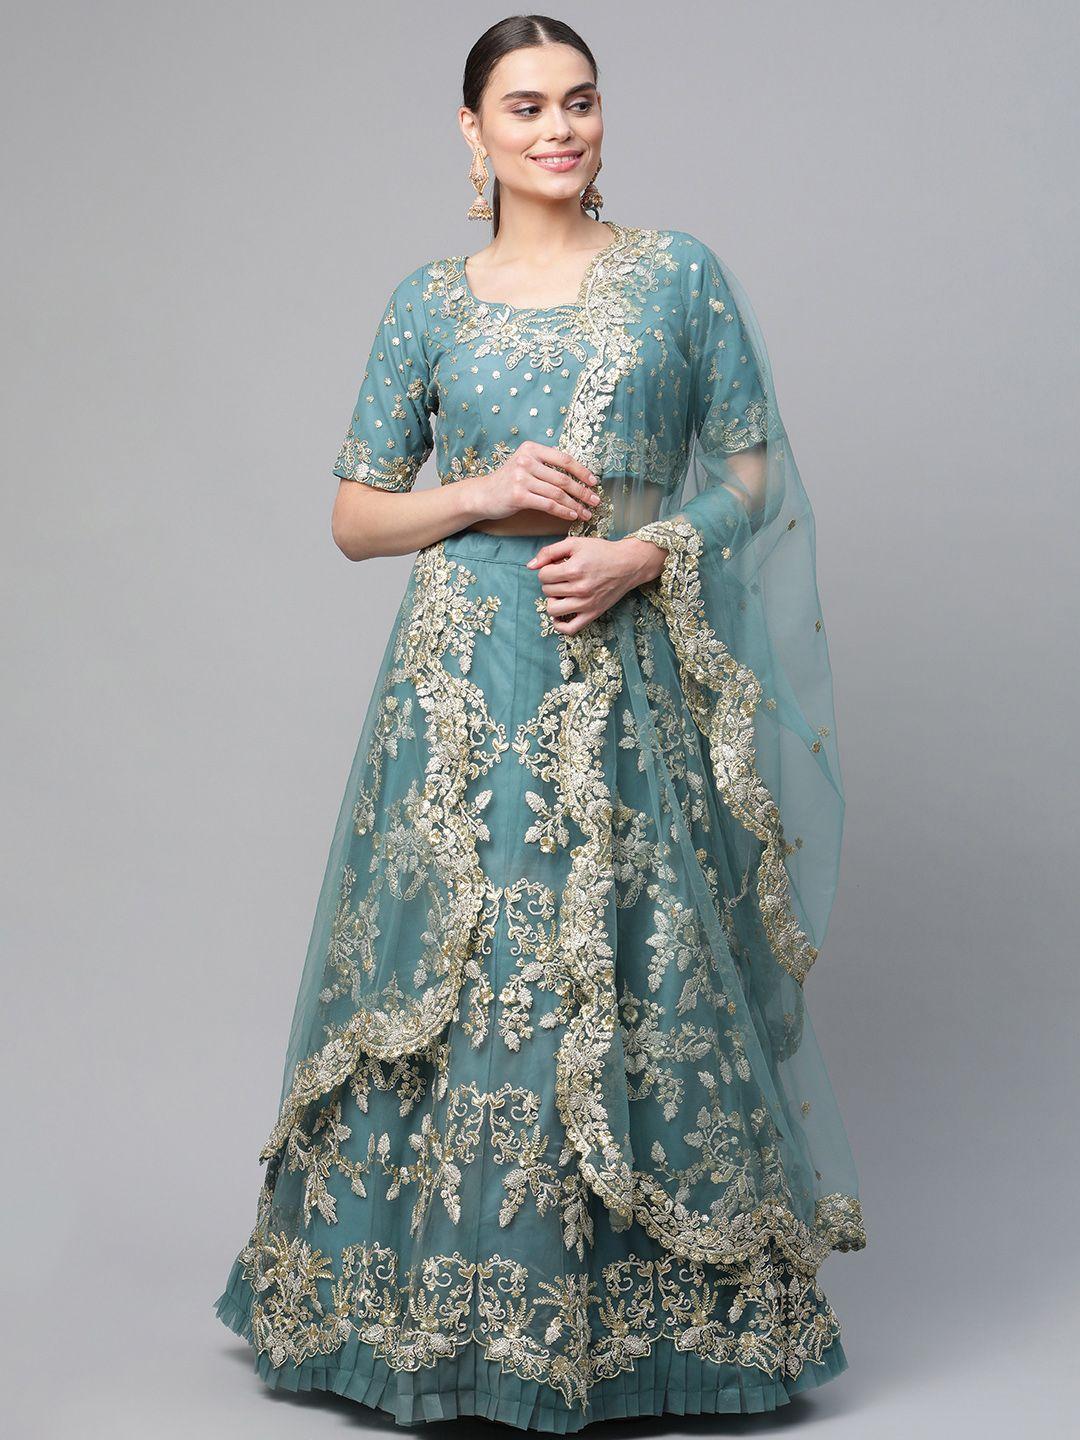 Readiprint Fashions Teal & Gold-Toned Embroidered Semi-Stitched Lehenga & Unstitched Blouse With Dupatta